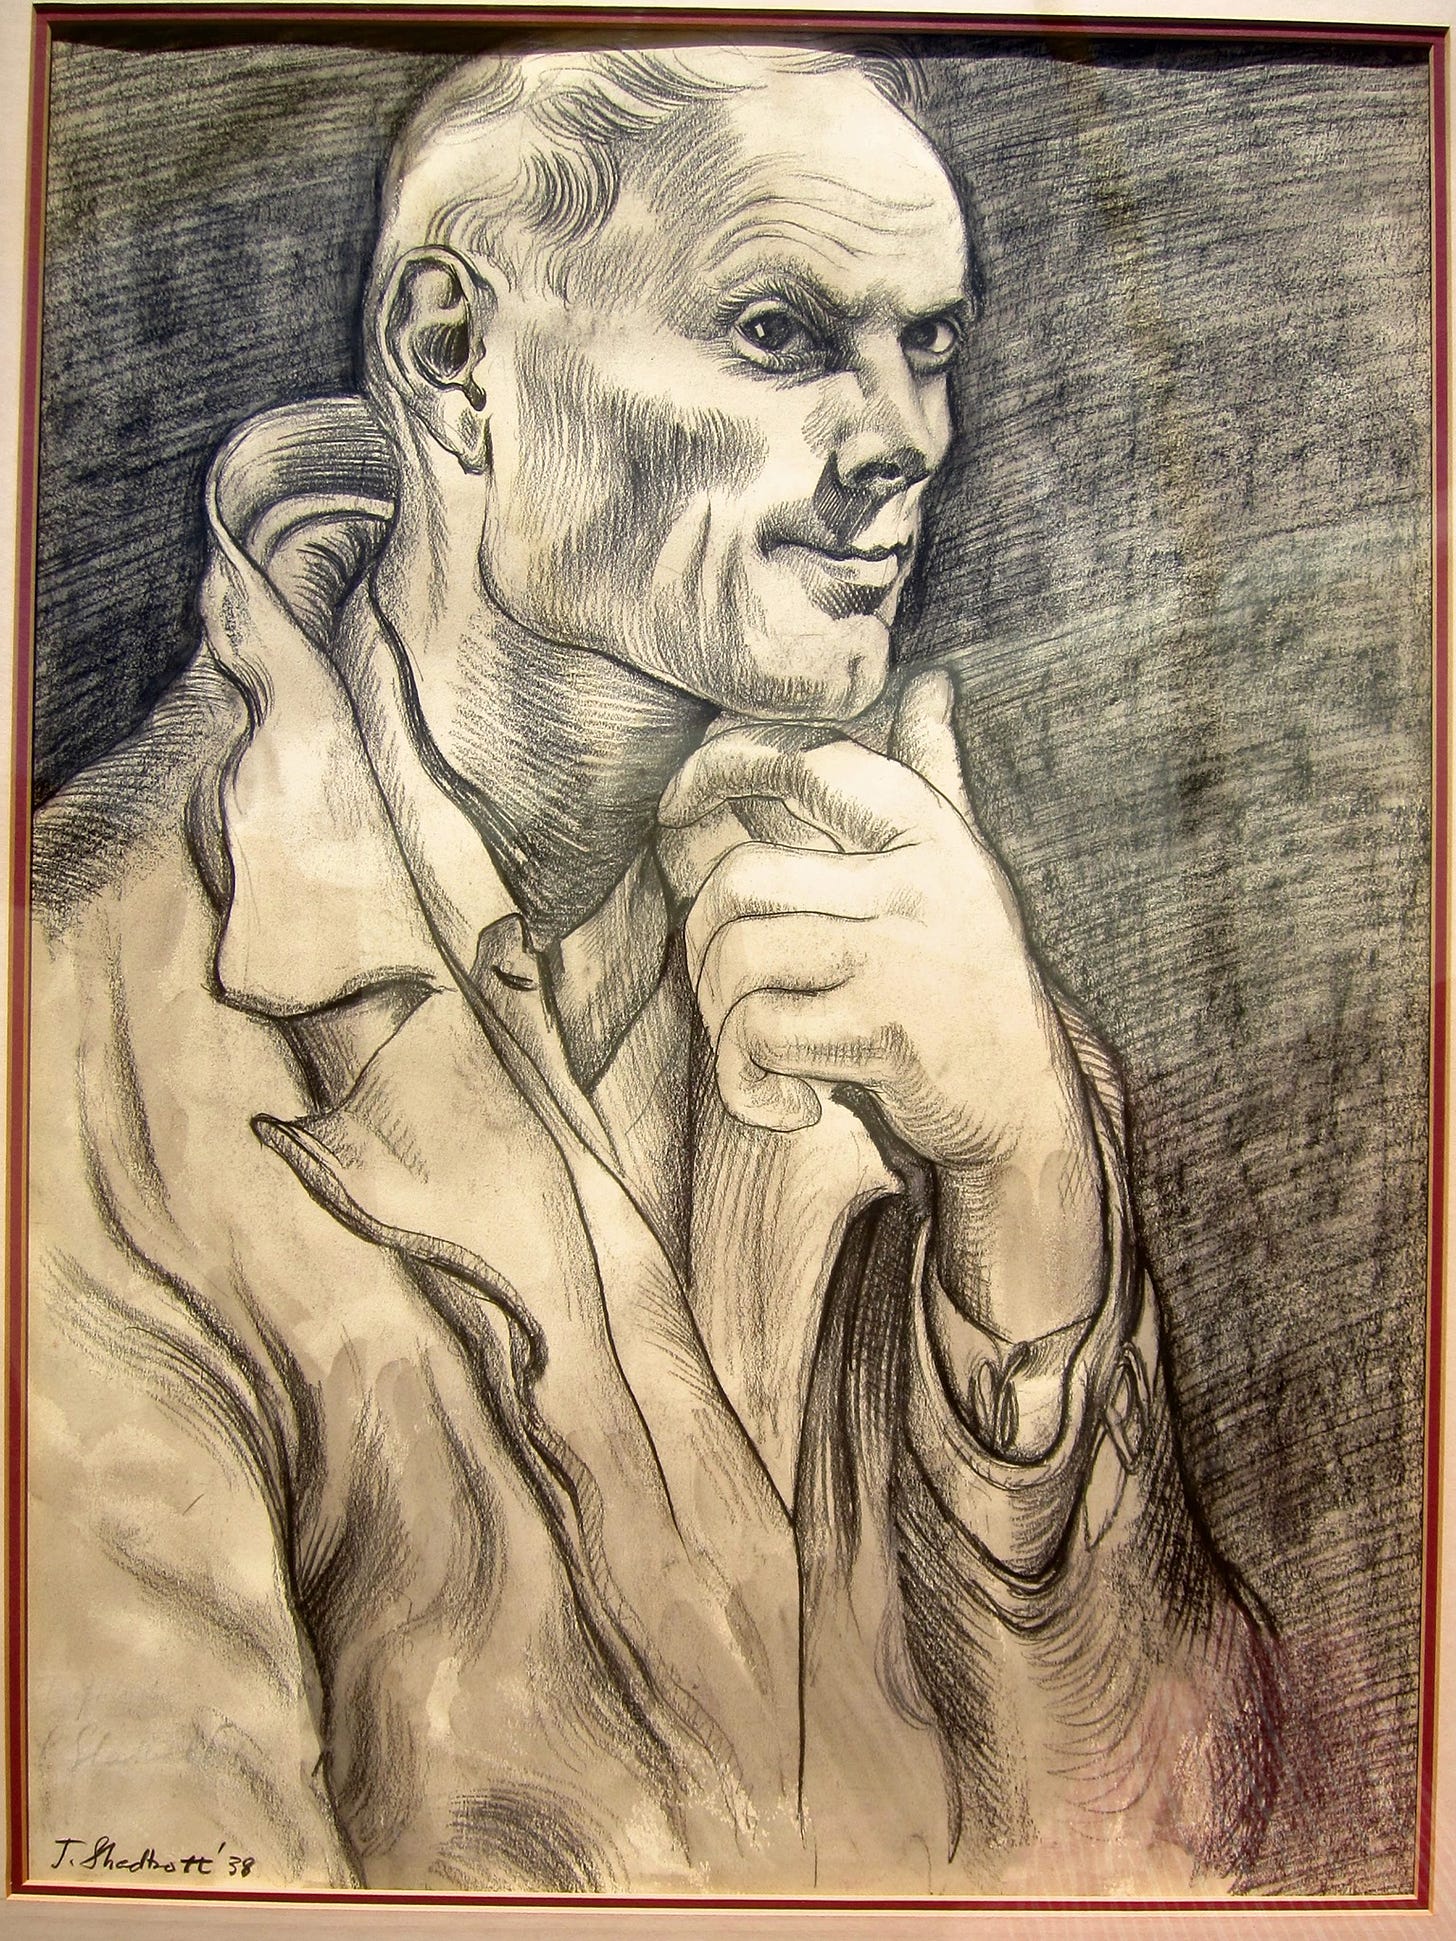 Drawing of a pensive young man with his hand on his chin